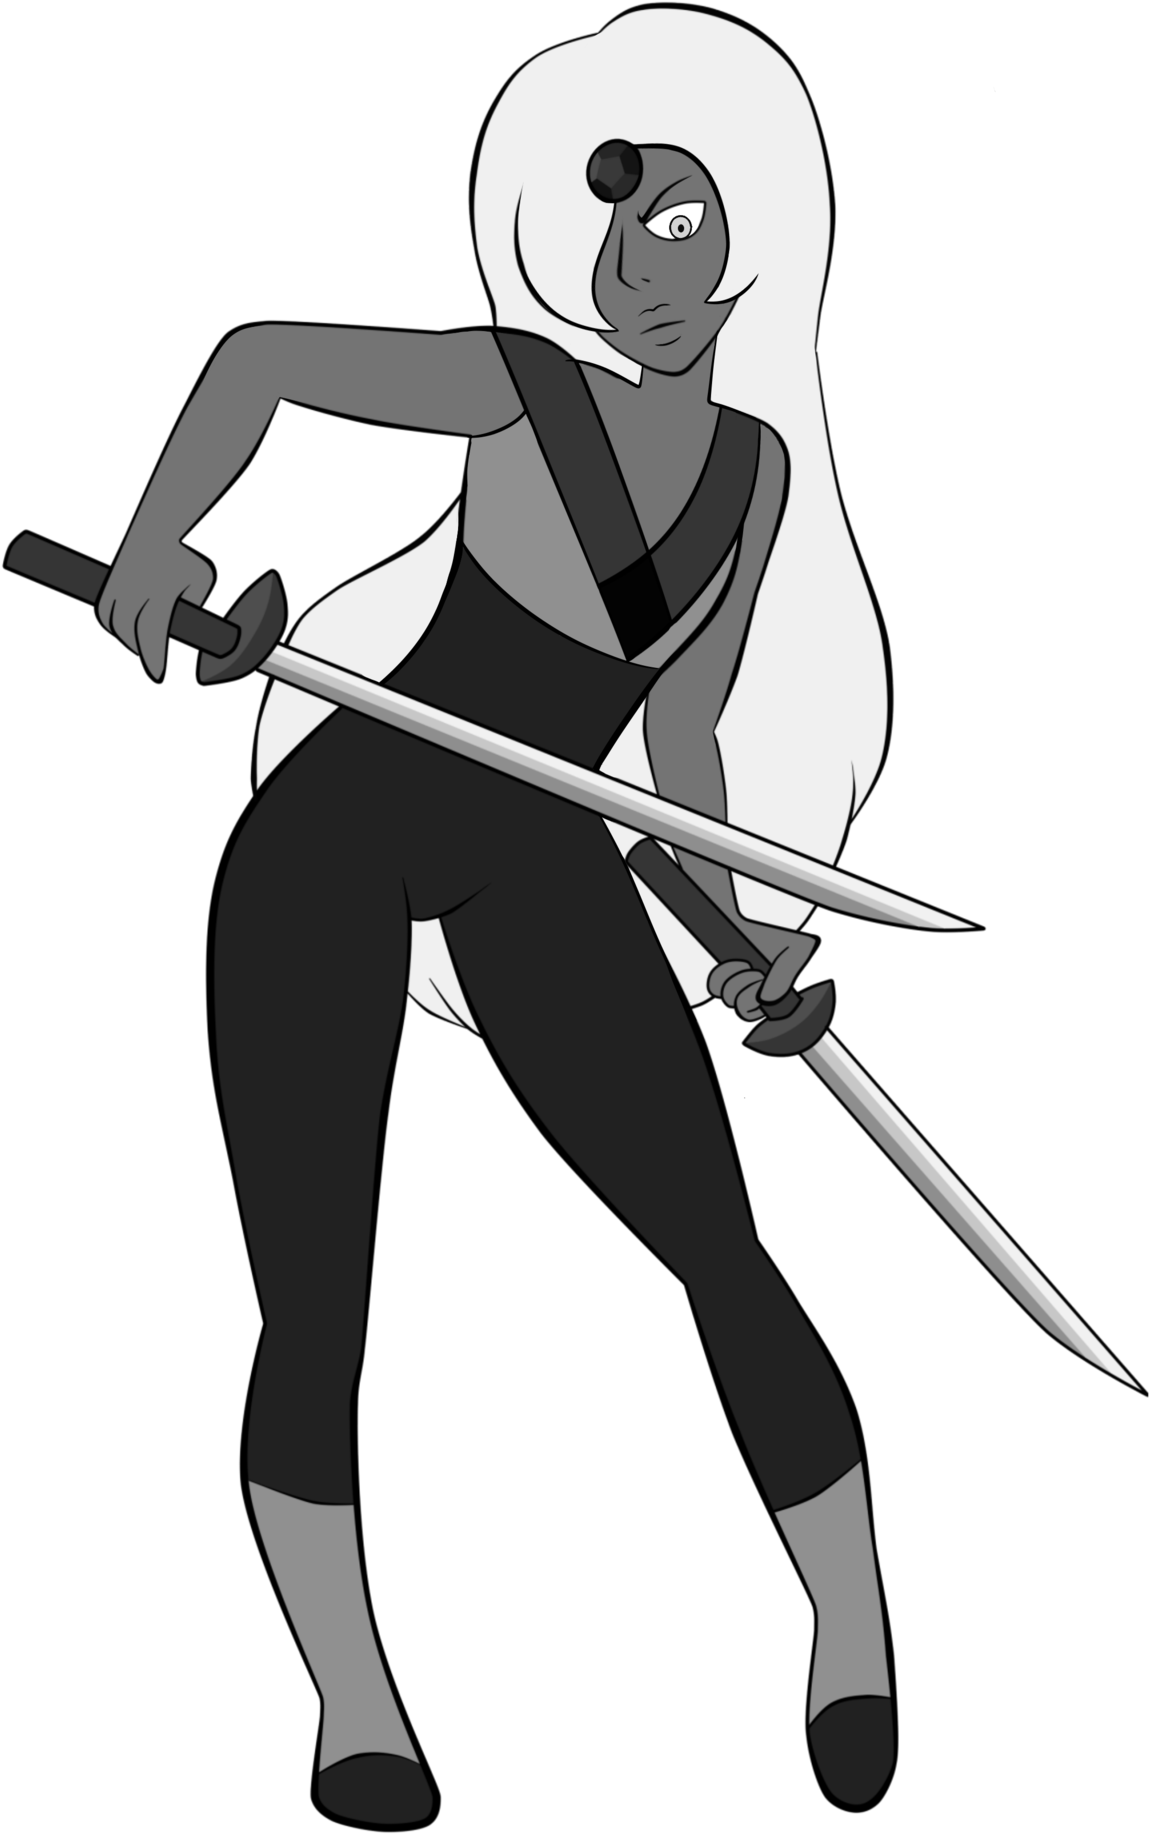 Animated Character Wielding Sword PNG